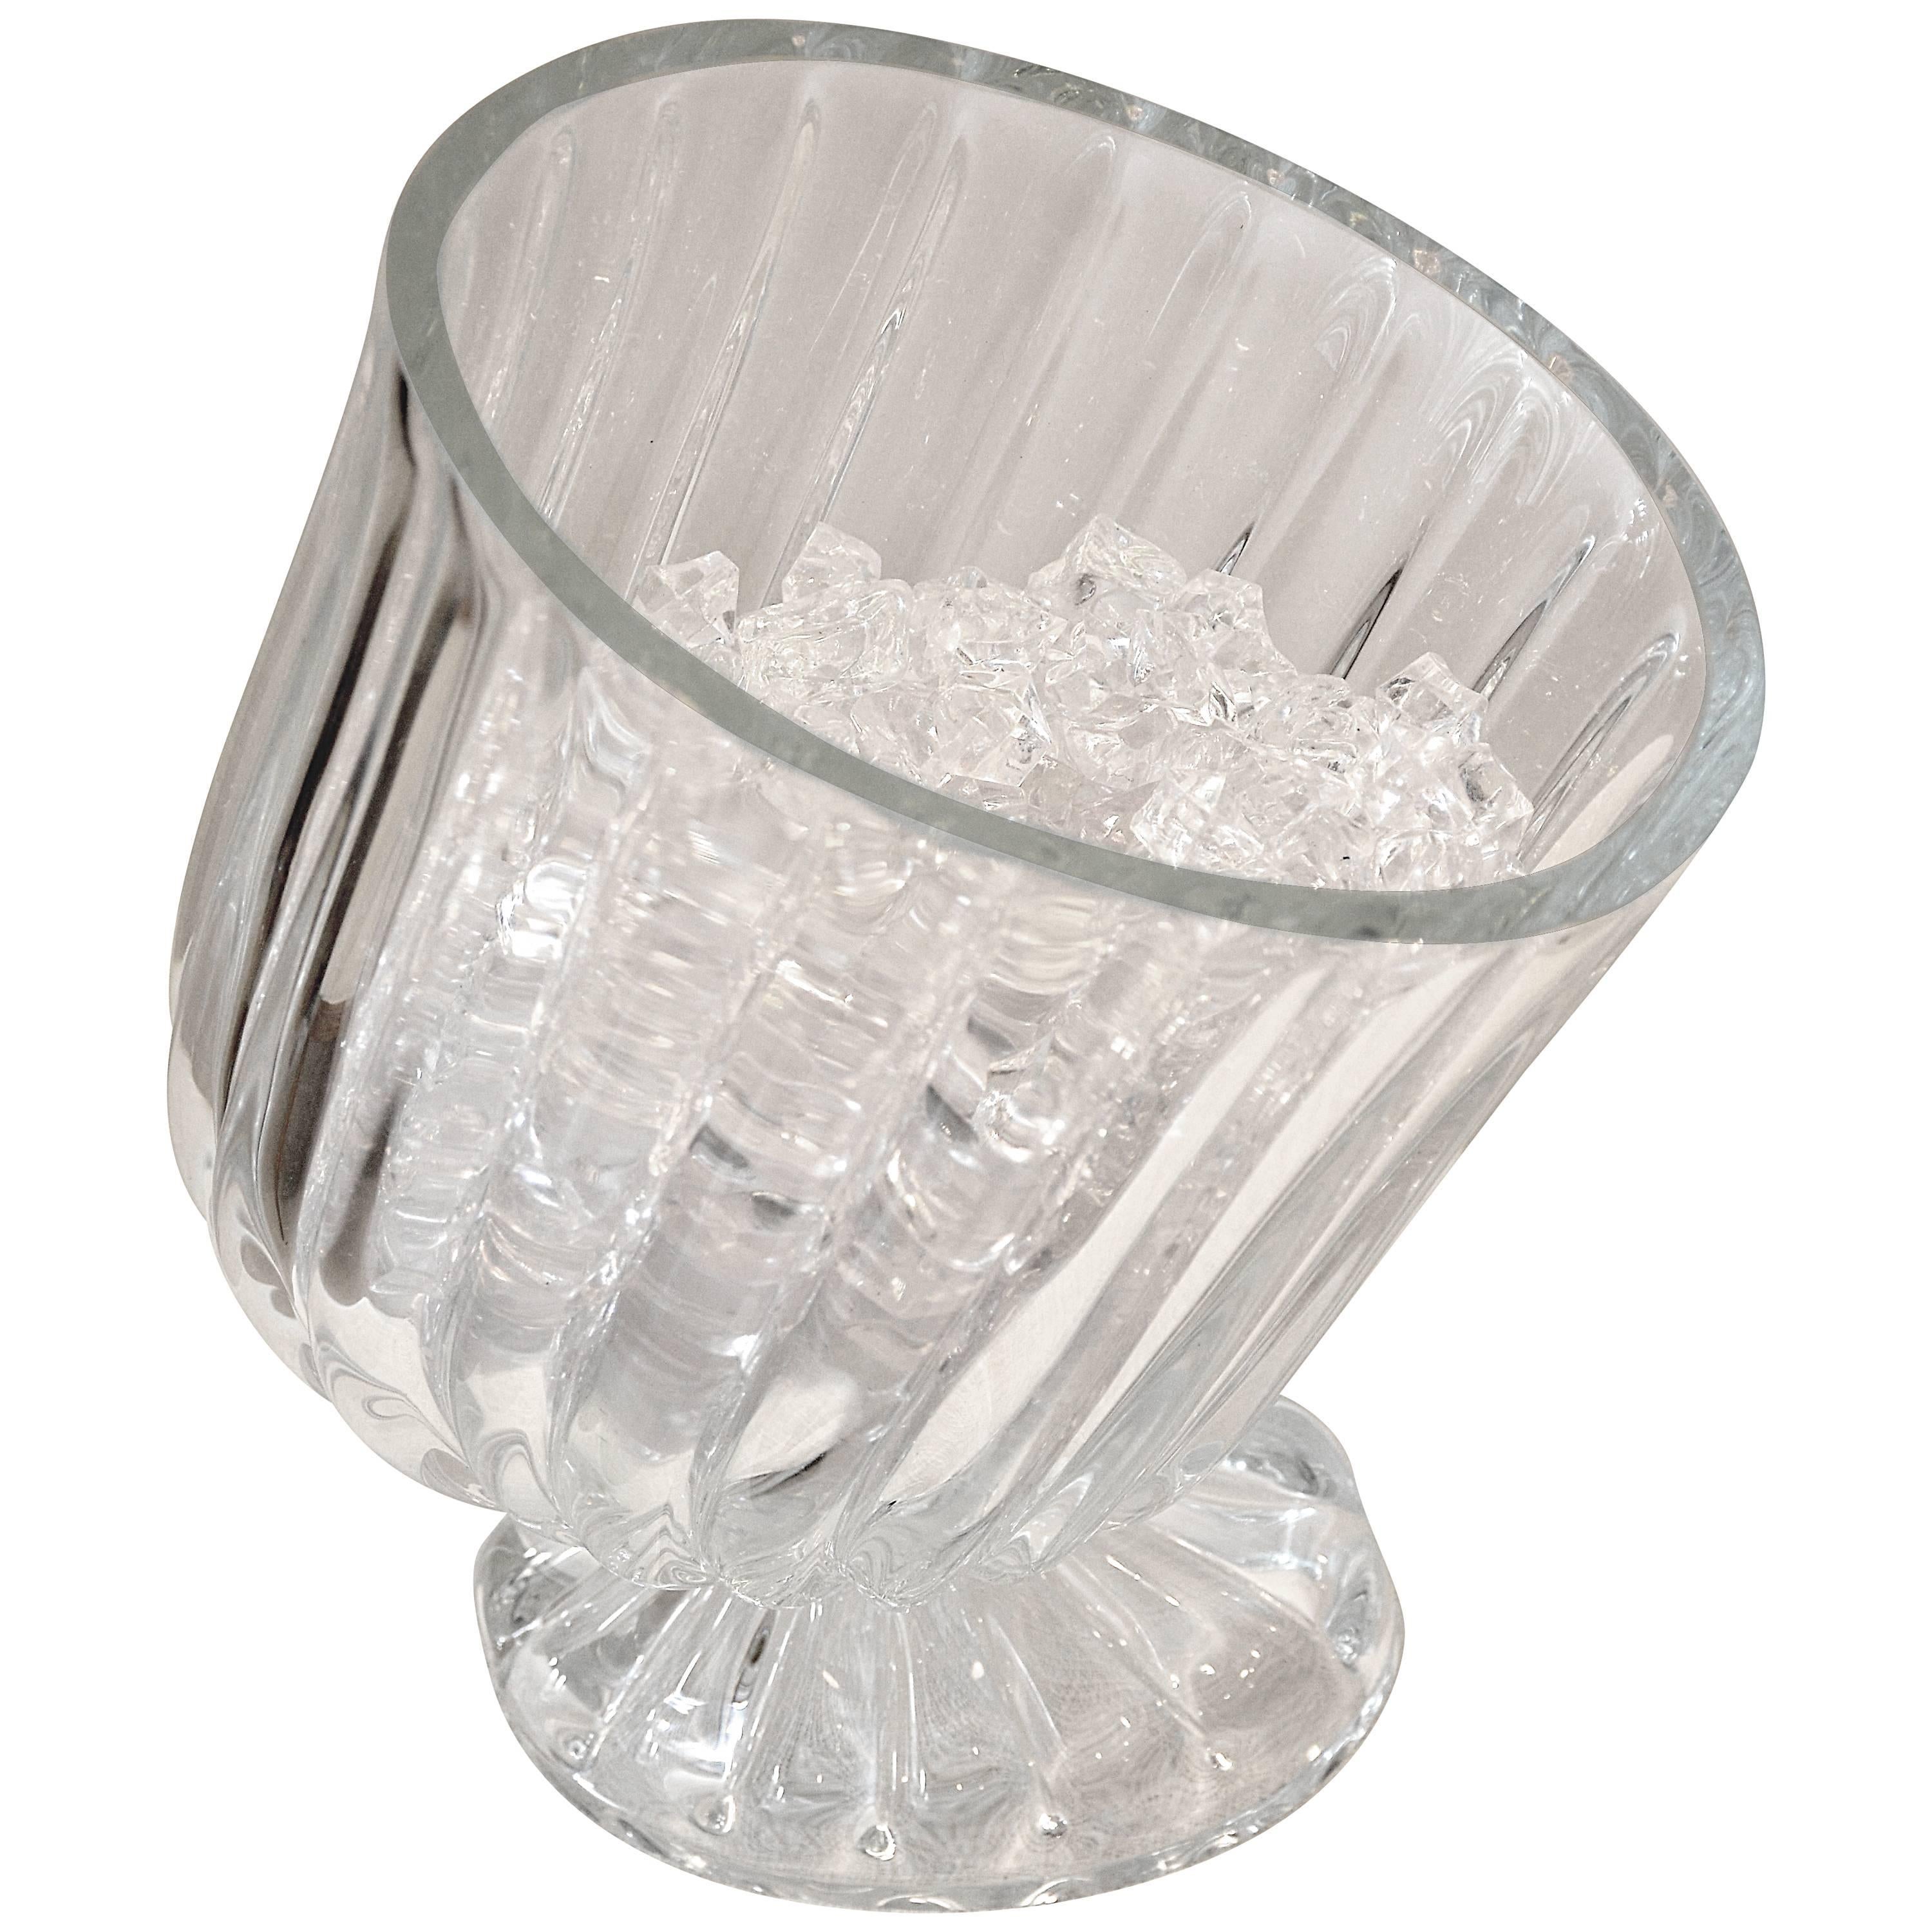 Optic Crystal Wine Chiller